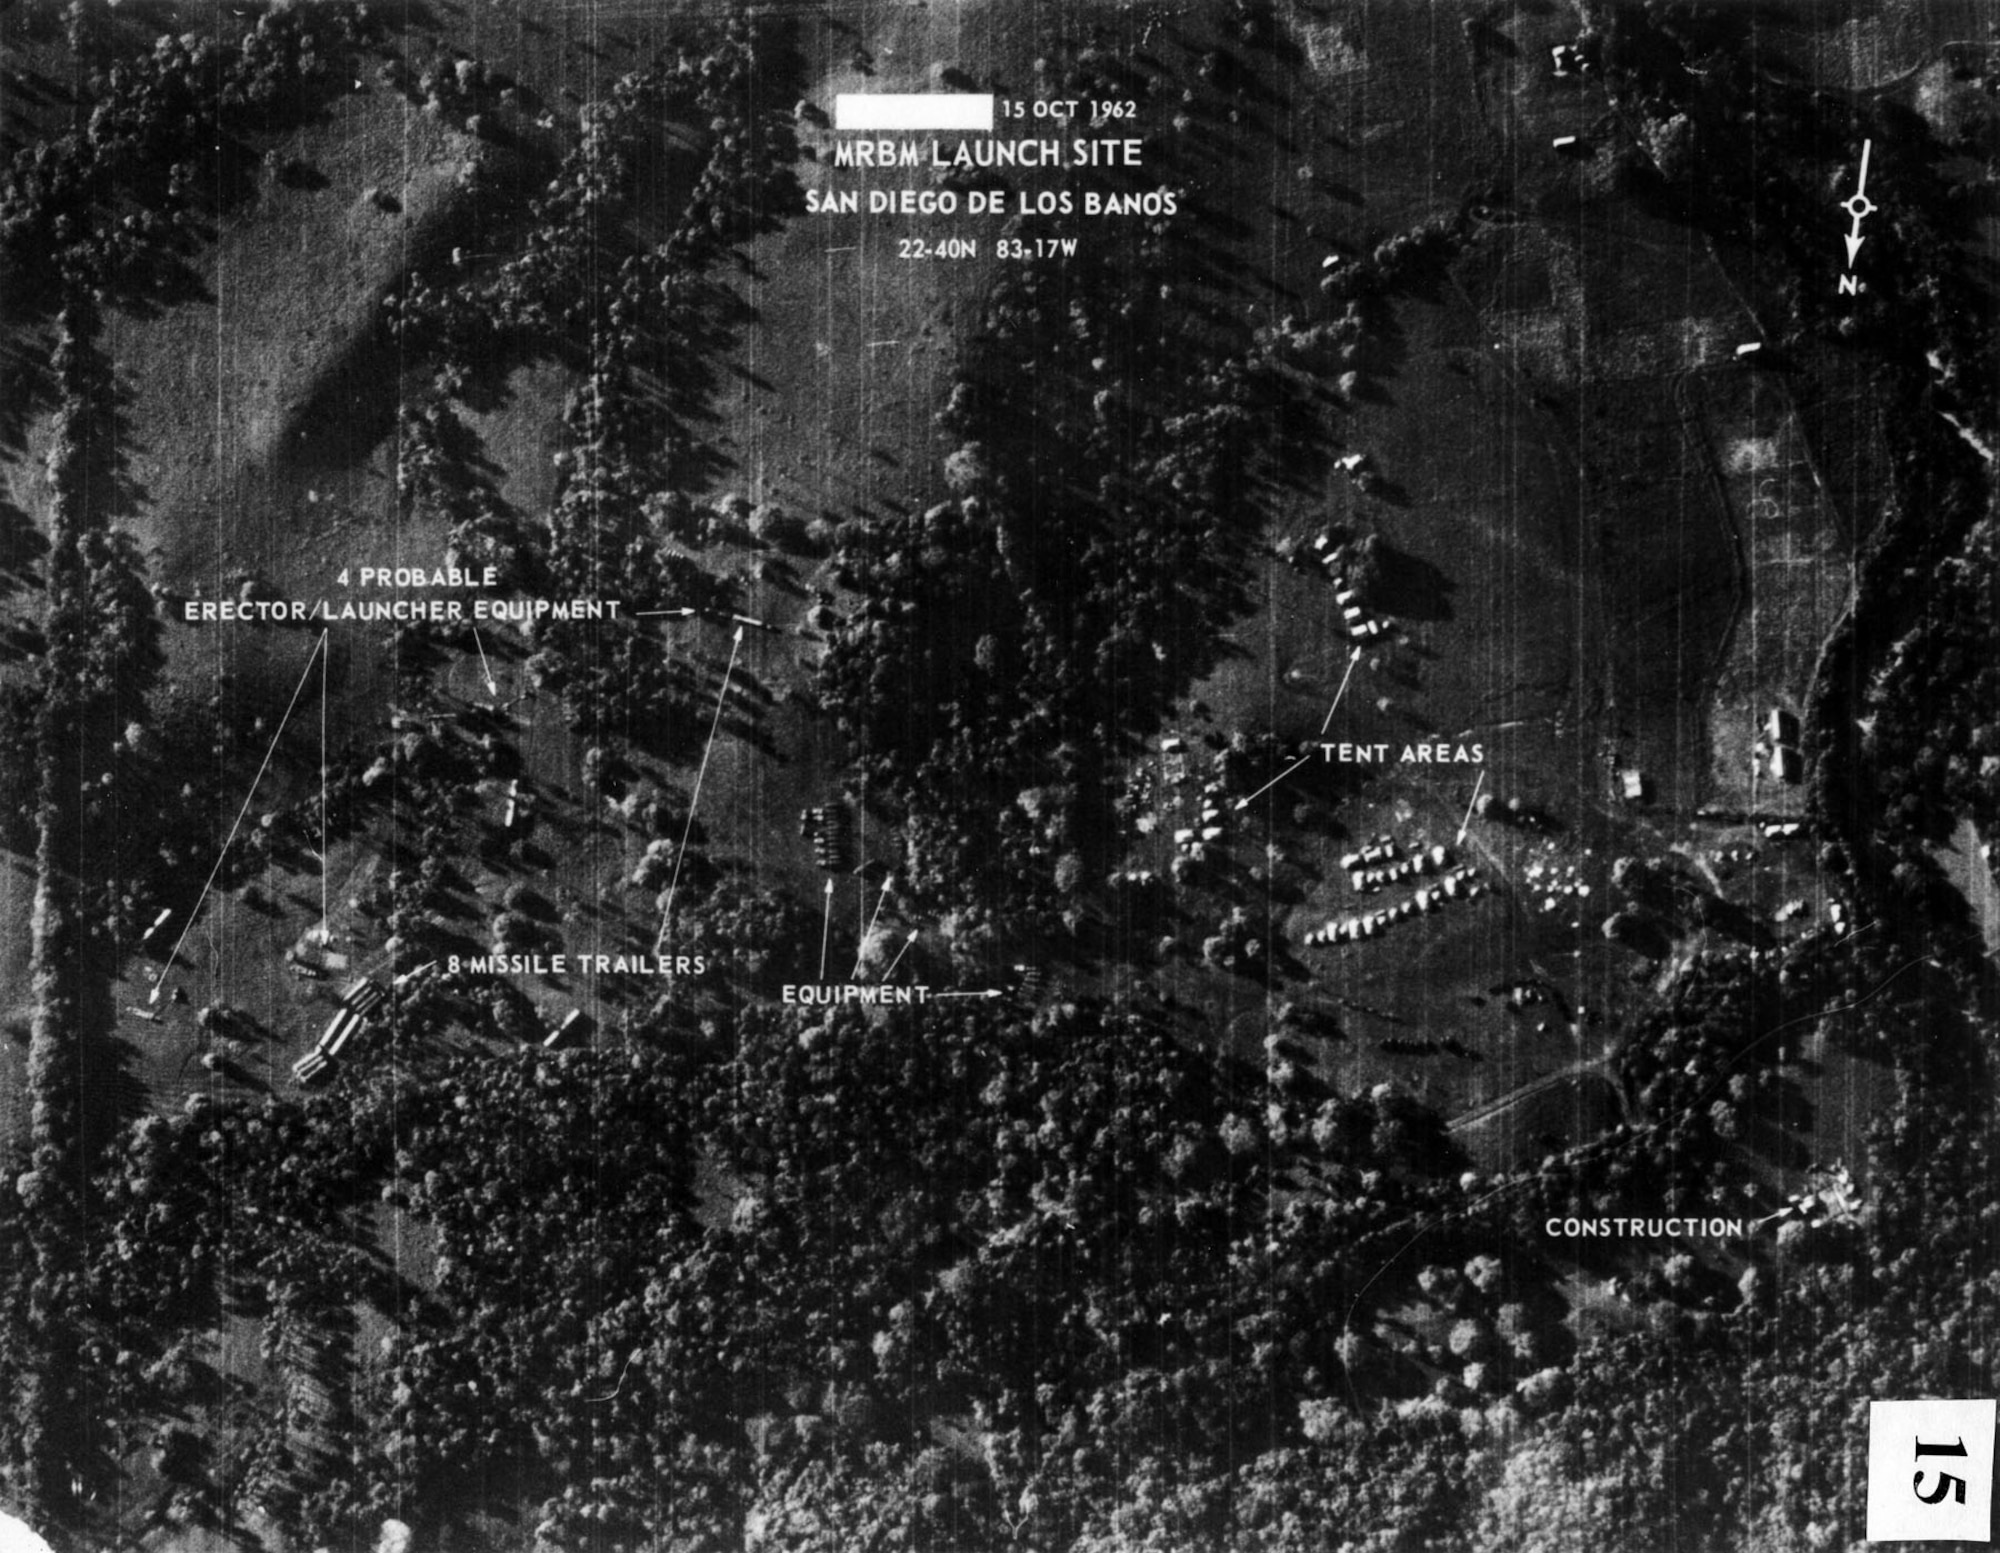 Soviet SS-4 missile installations in Cuba photographed from a U-2 on Oct. 14, 1962. This was the second set of missiles identified. (U.S. Air Force photo)